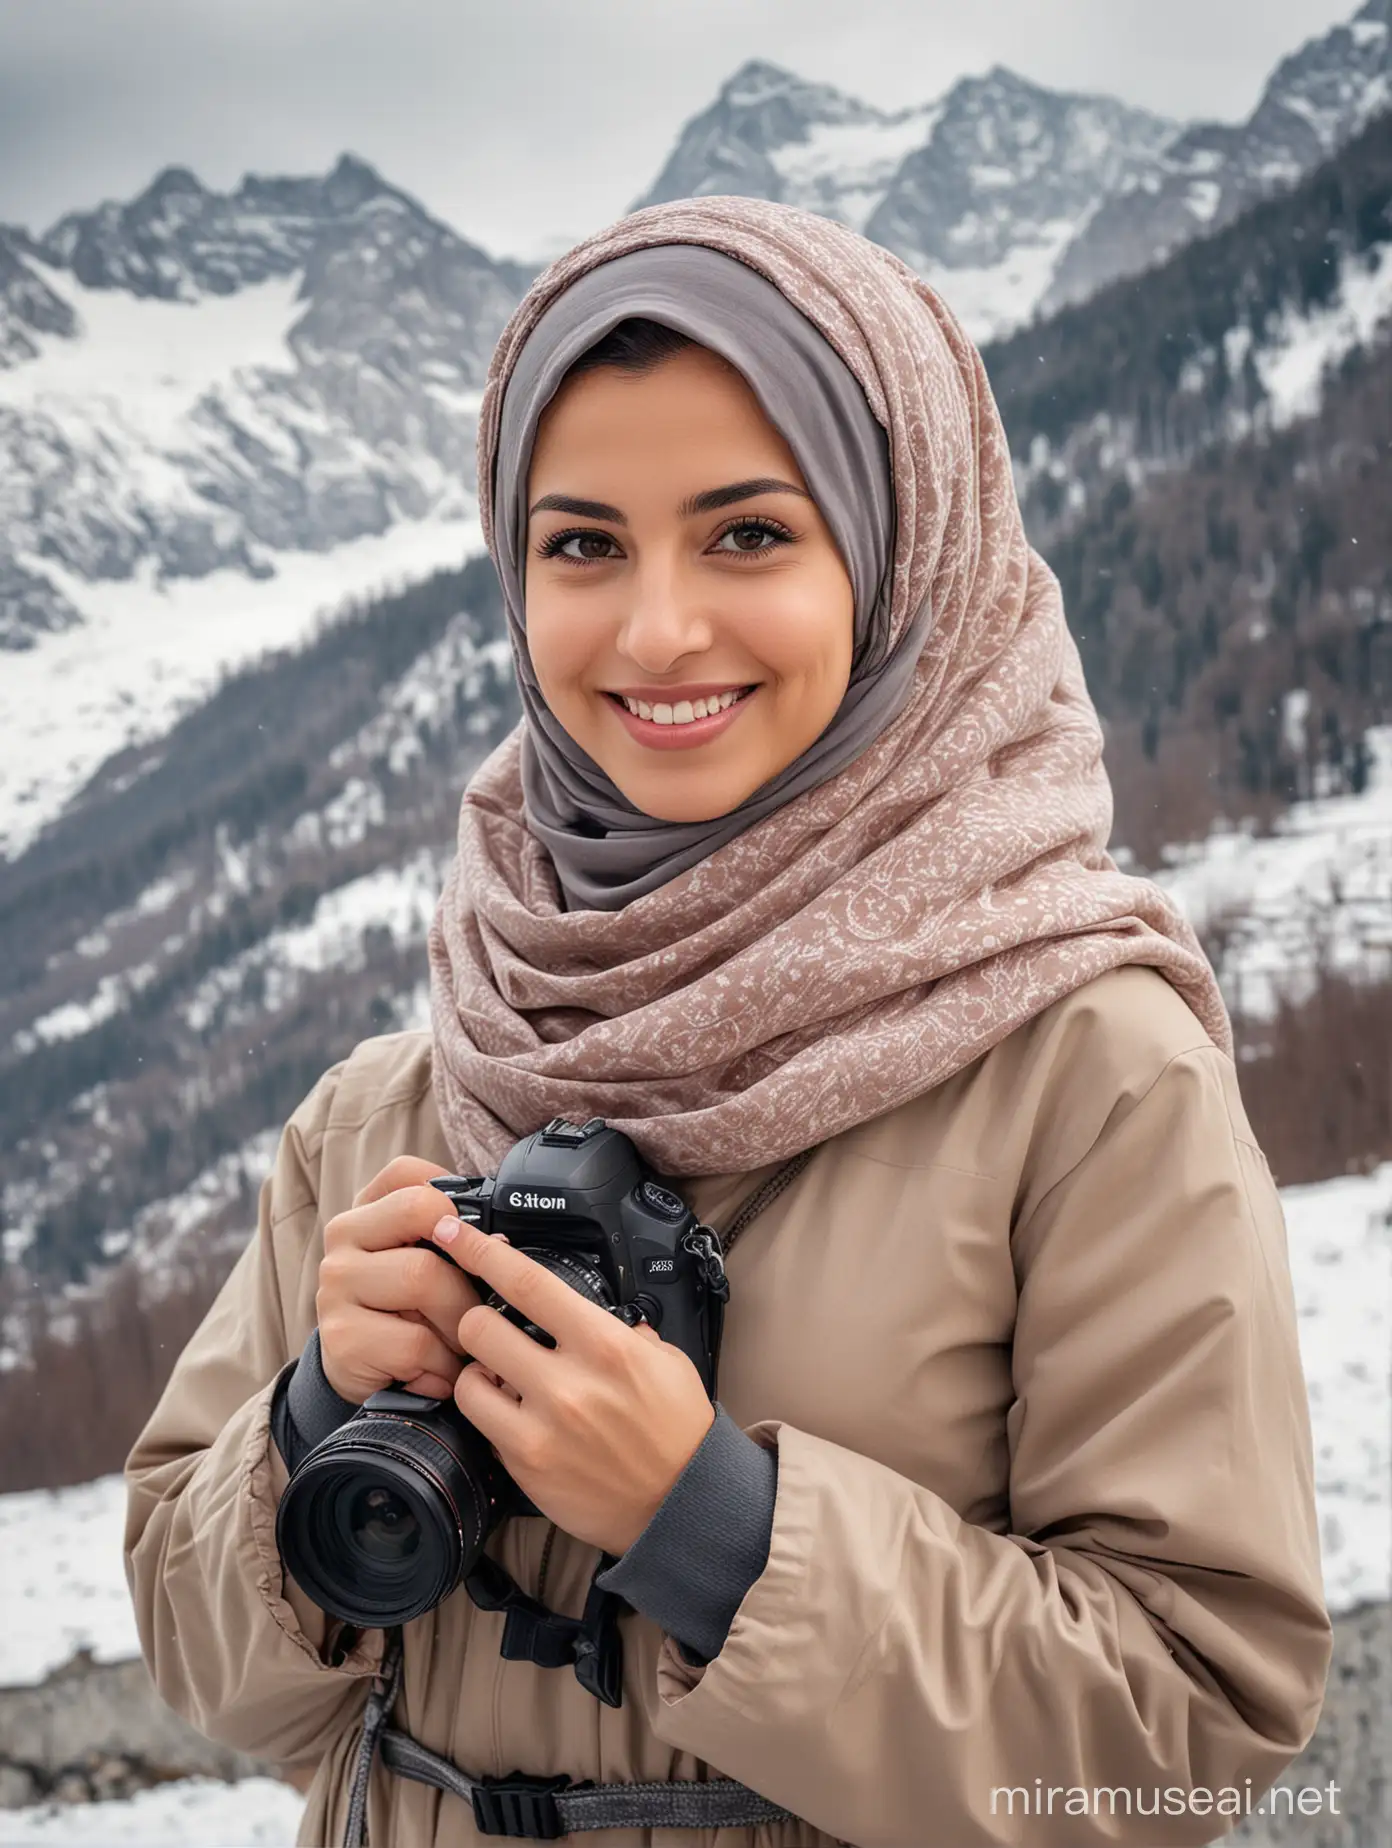 Young Woman in Jilbab Smiling with DSLR Camera in Snowy Swiss Mountains